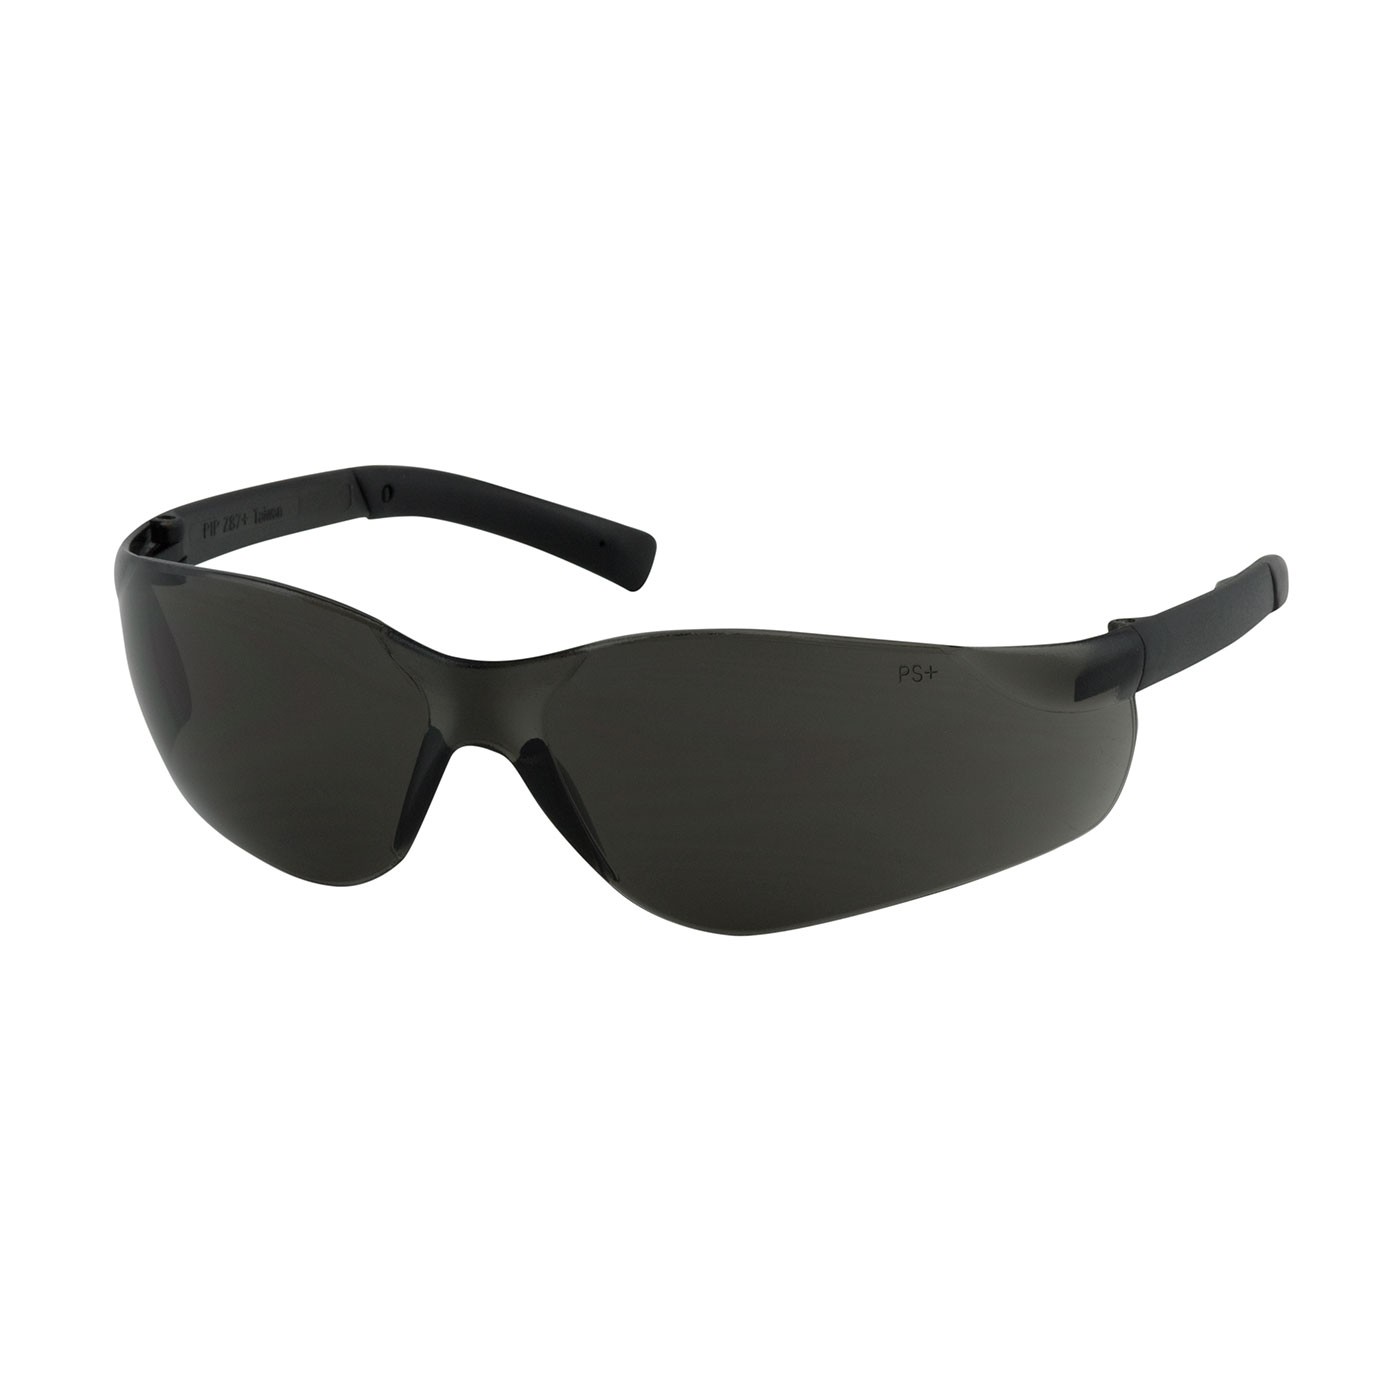  Zenon Z13™ Rimless Safety Glasses with Dark Gray Temple, Gray Lens and Anti-Scratch / Anti-Fog Coating  (#250-06-5521)